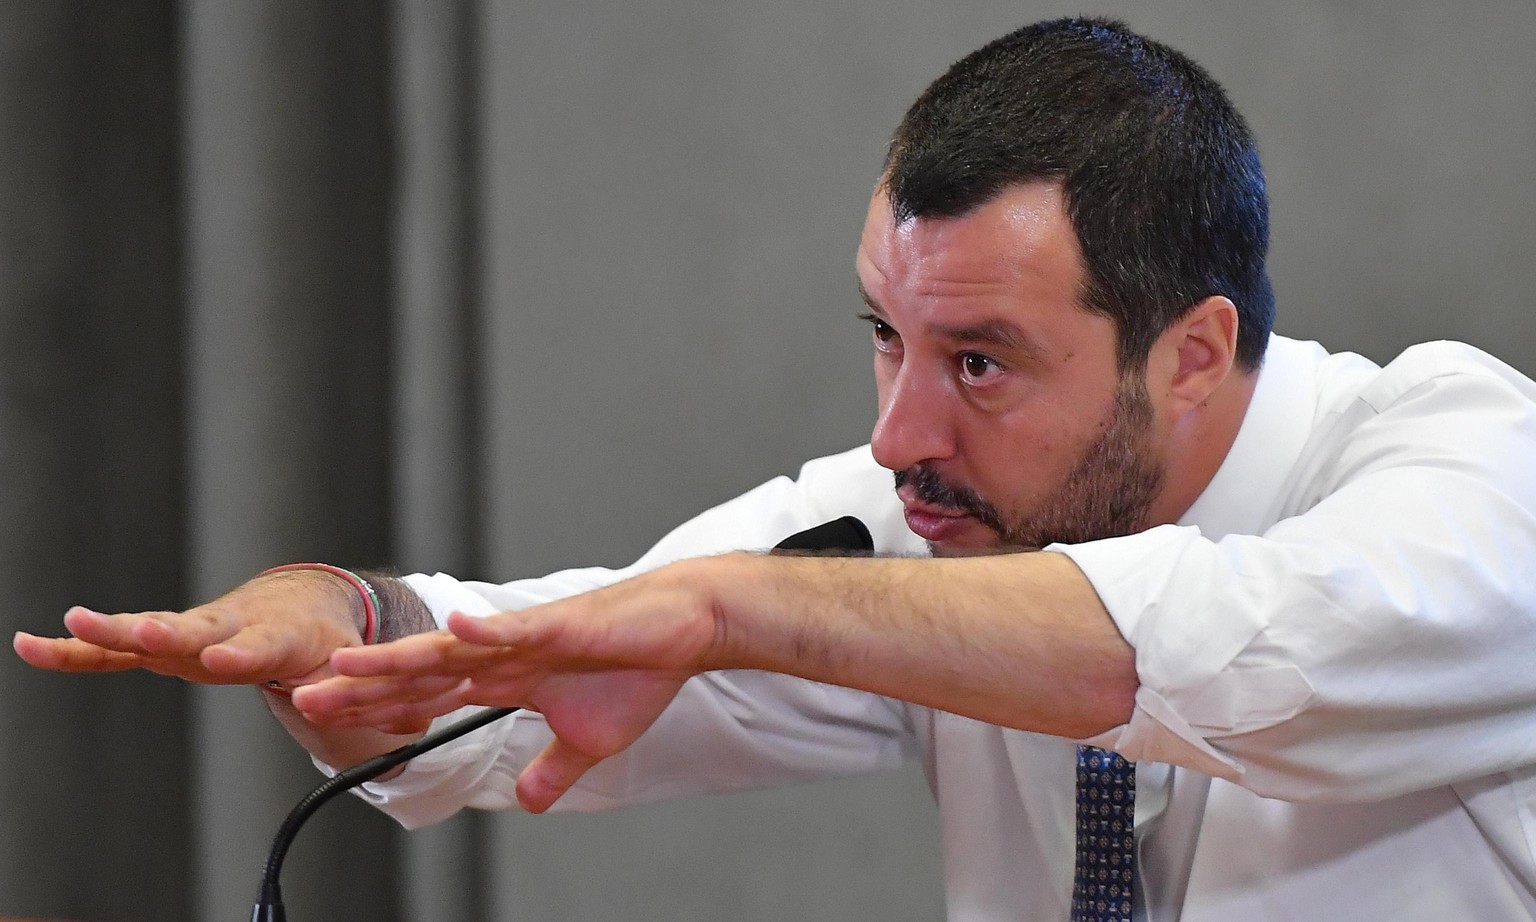 epa06839670 Italian Interior Minister Matteo Salvini speaks during a press conference at Viminale palace in Rome, 25 June 2018. According to reports, earlier in the day Salvini visited Tripolis and ca ...